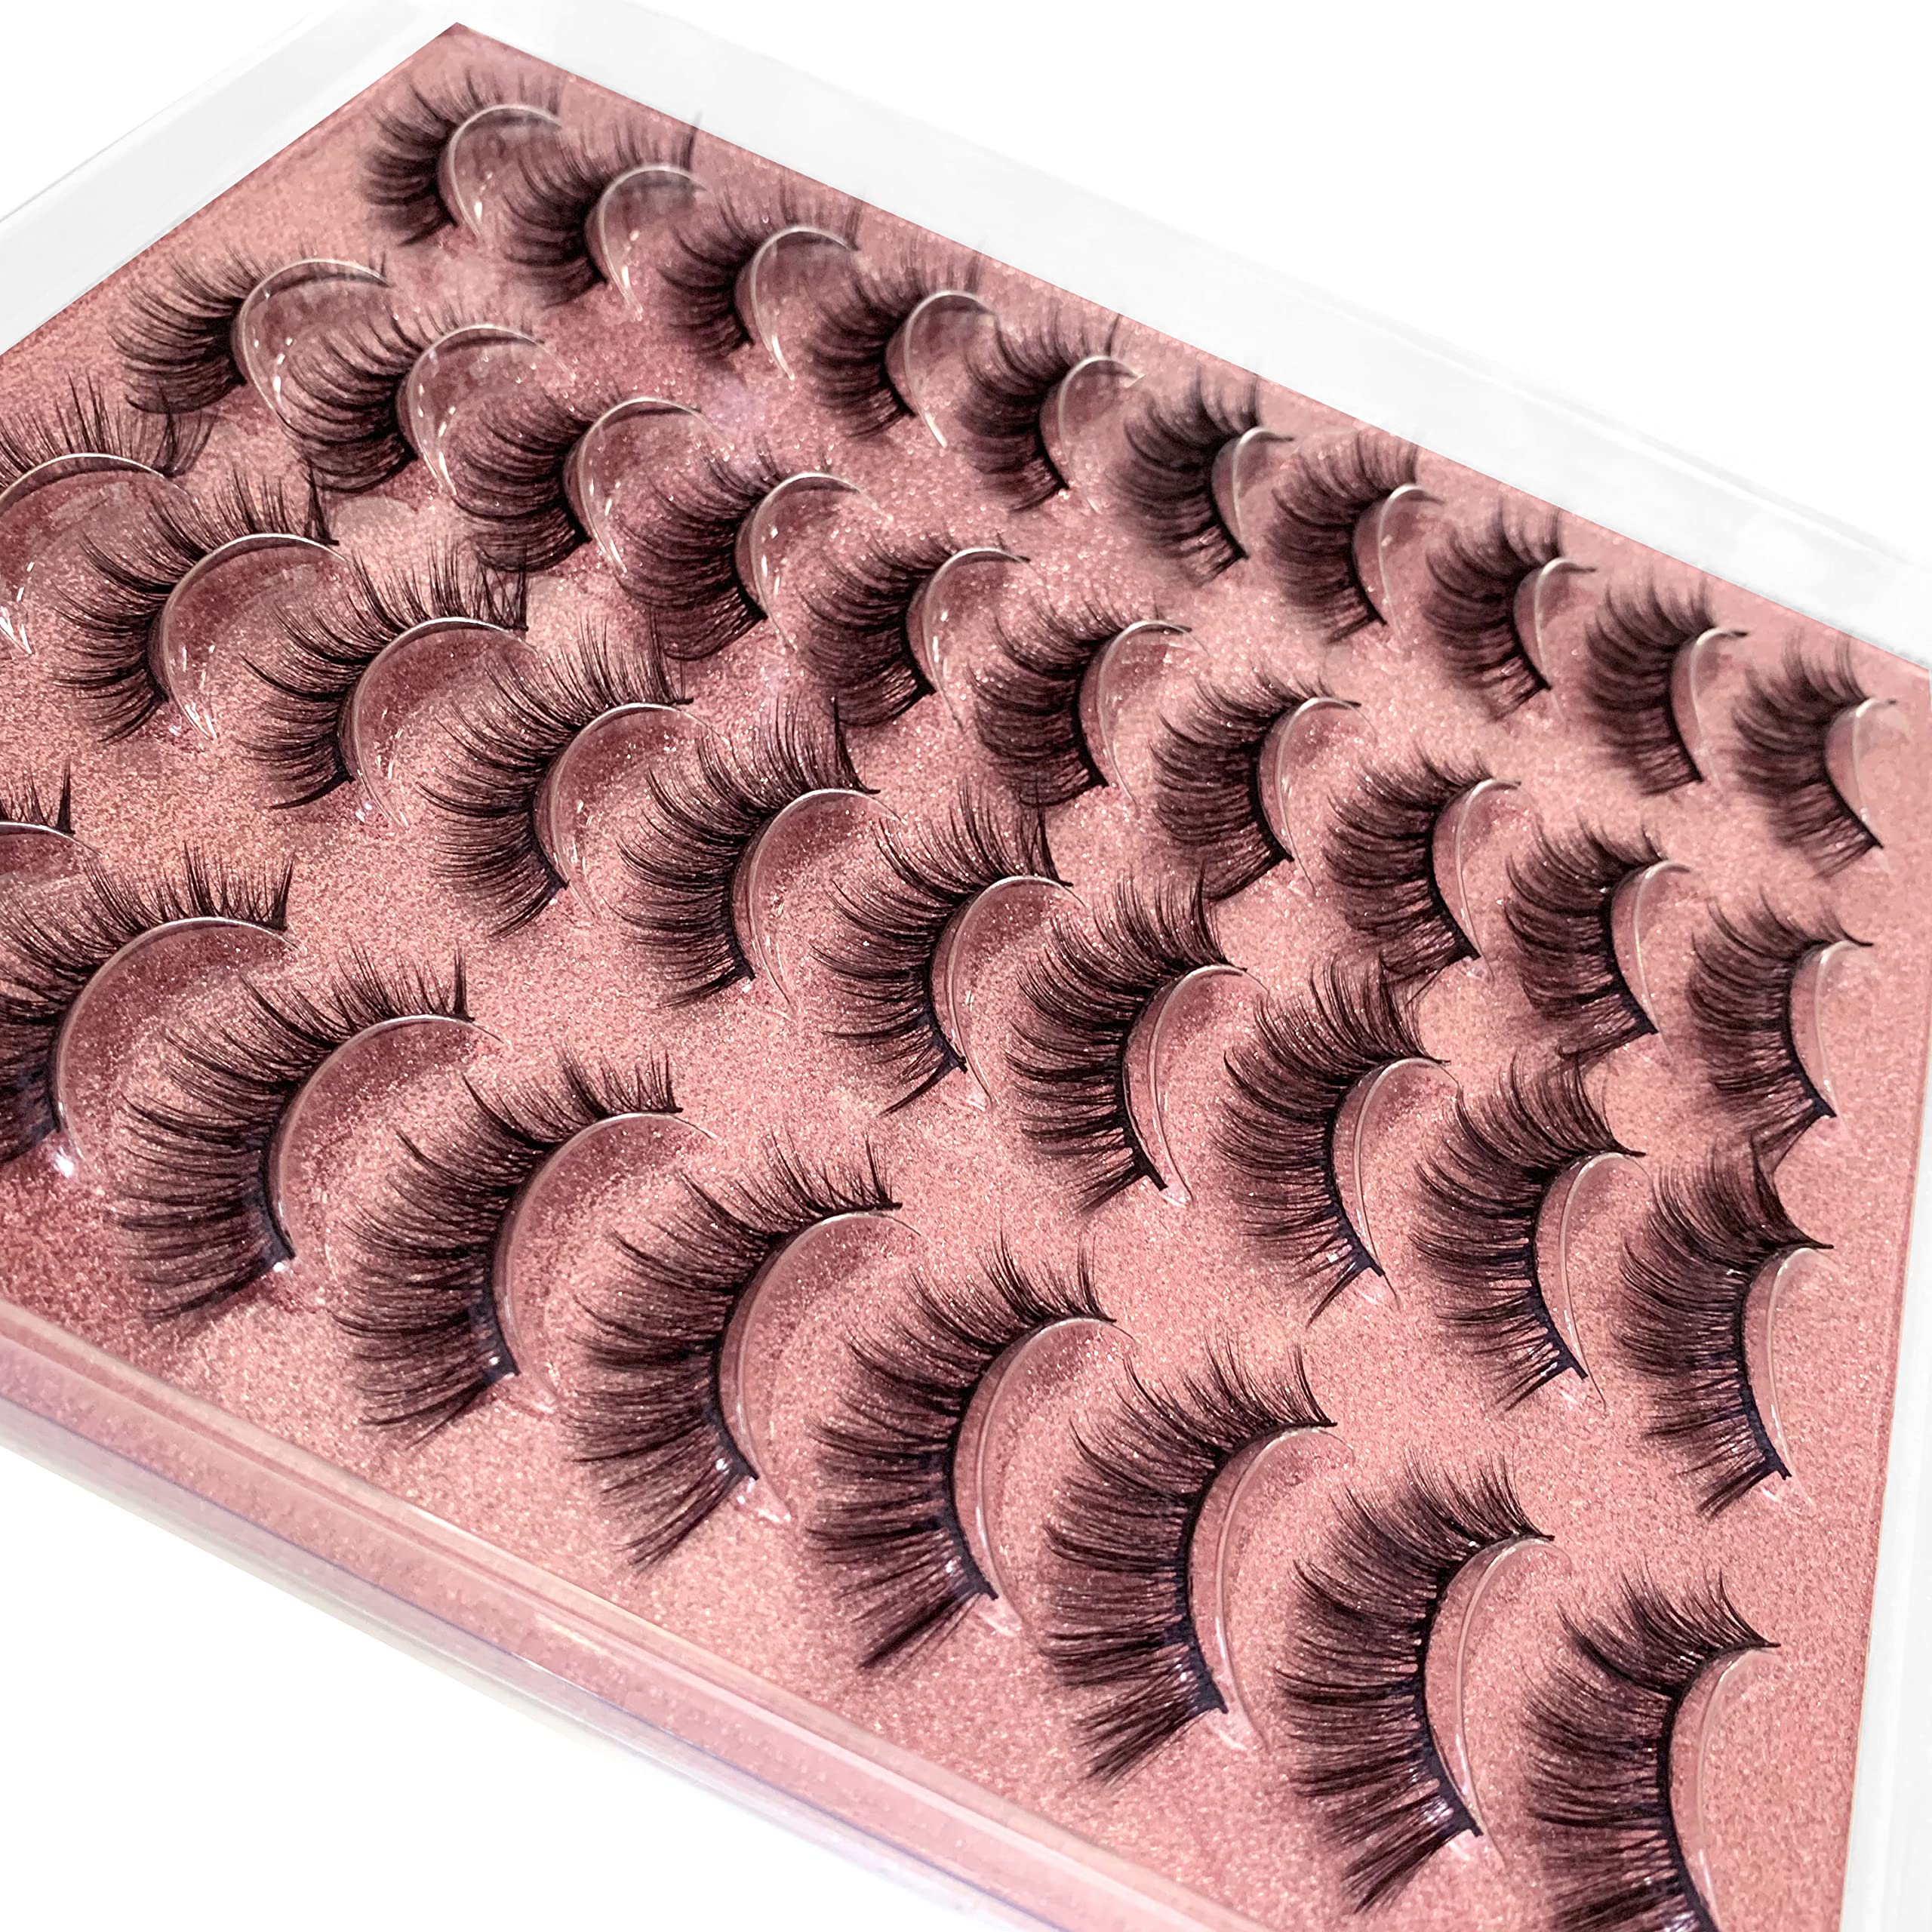 False Eyelashes Natural Cat Eyes Lashes Lightweight 3D Faux Mink Lashes Fluffy 20 Pairs Multipack No Glue Included